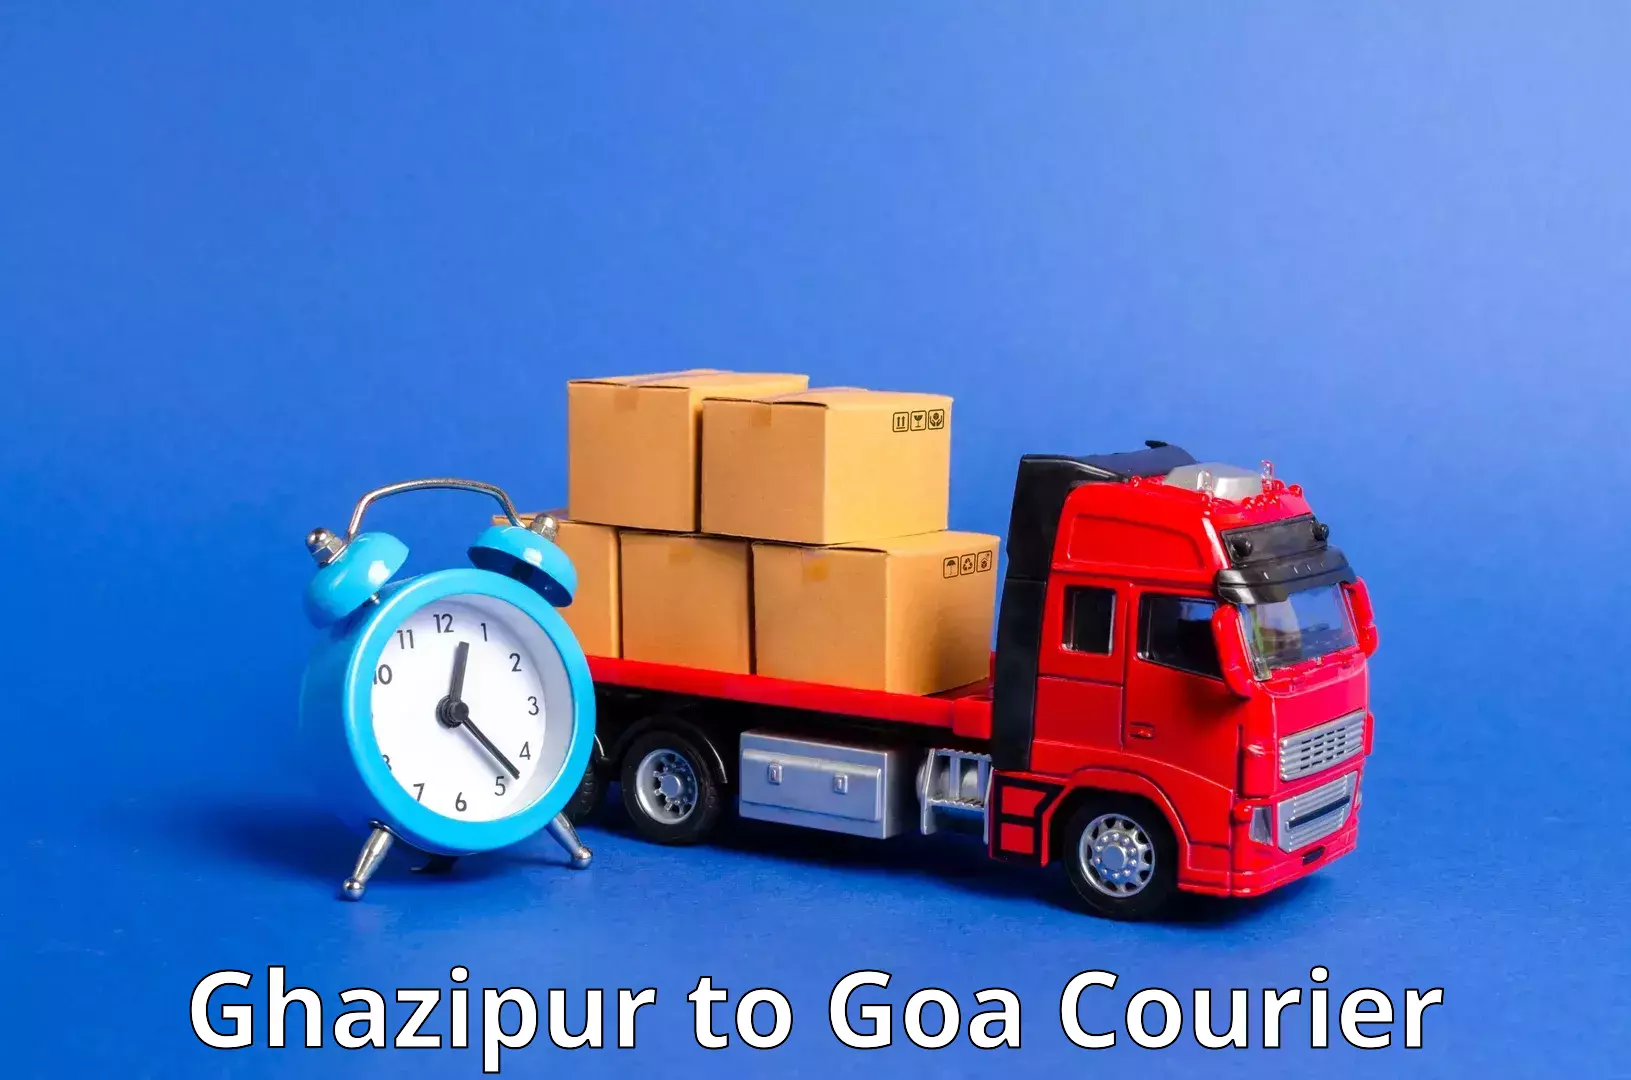 Cash on delivery service Ghazipur to Mormugao Port